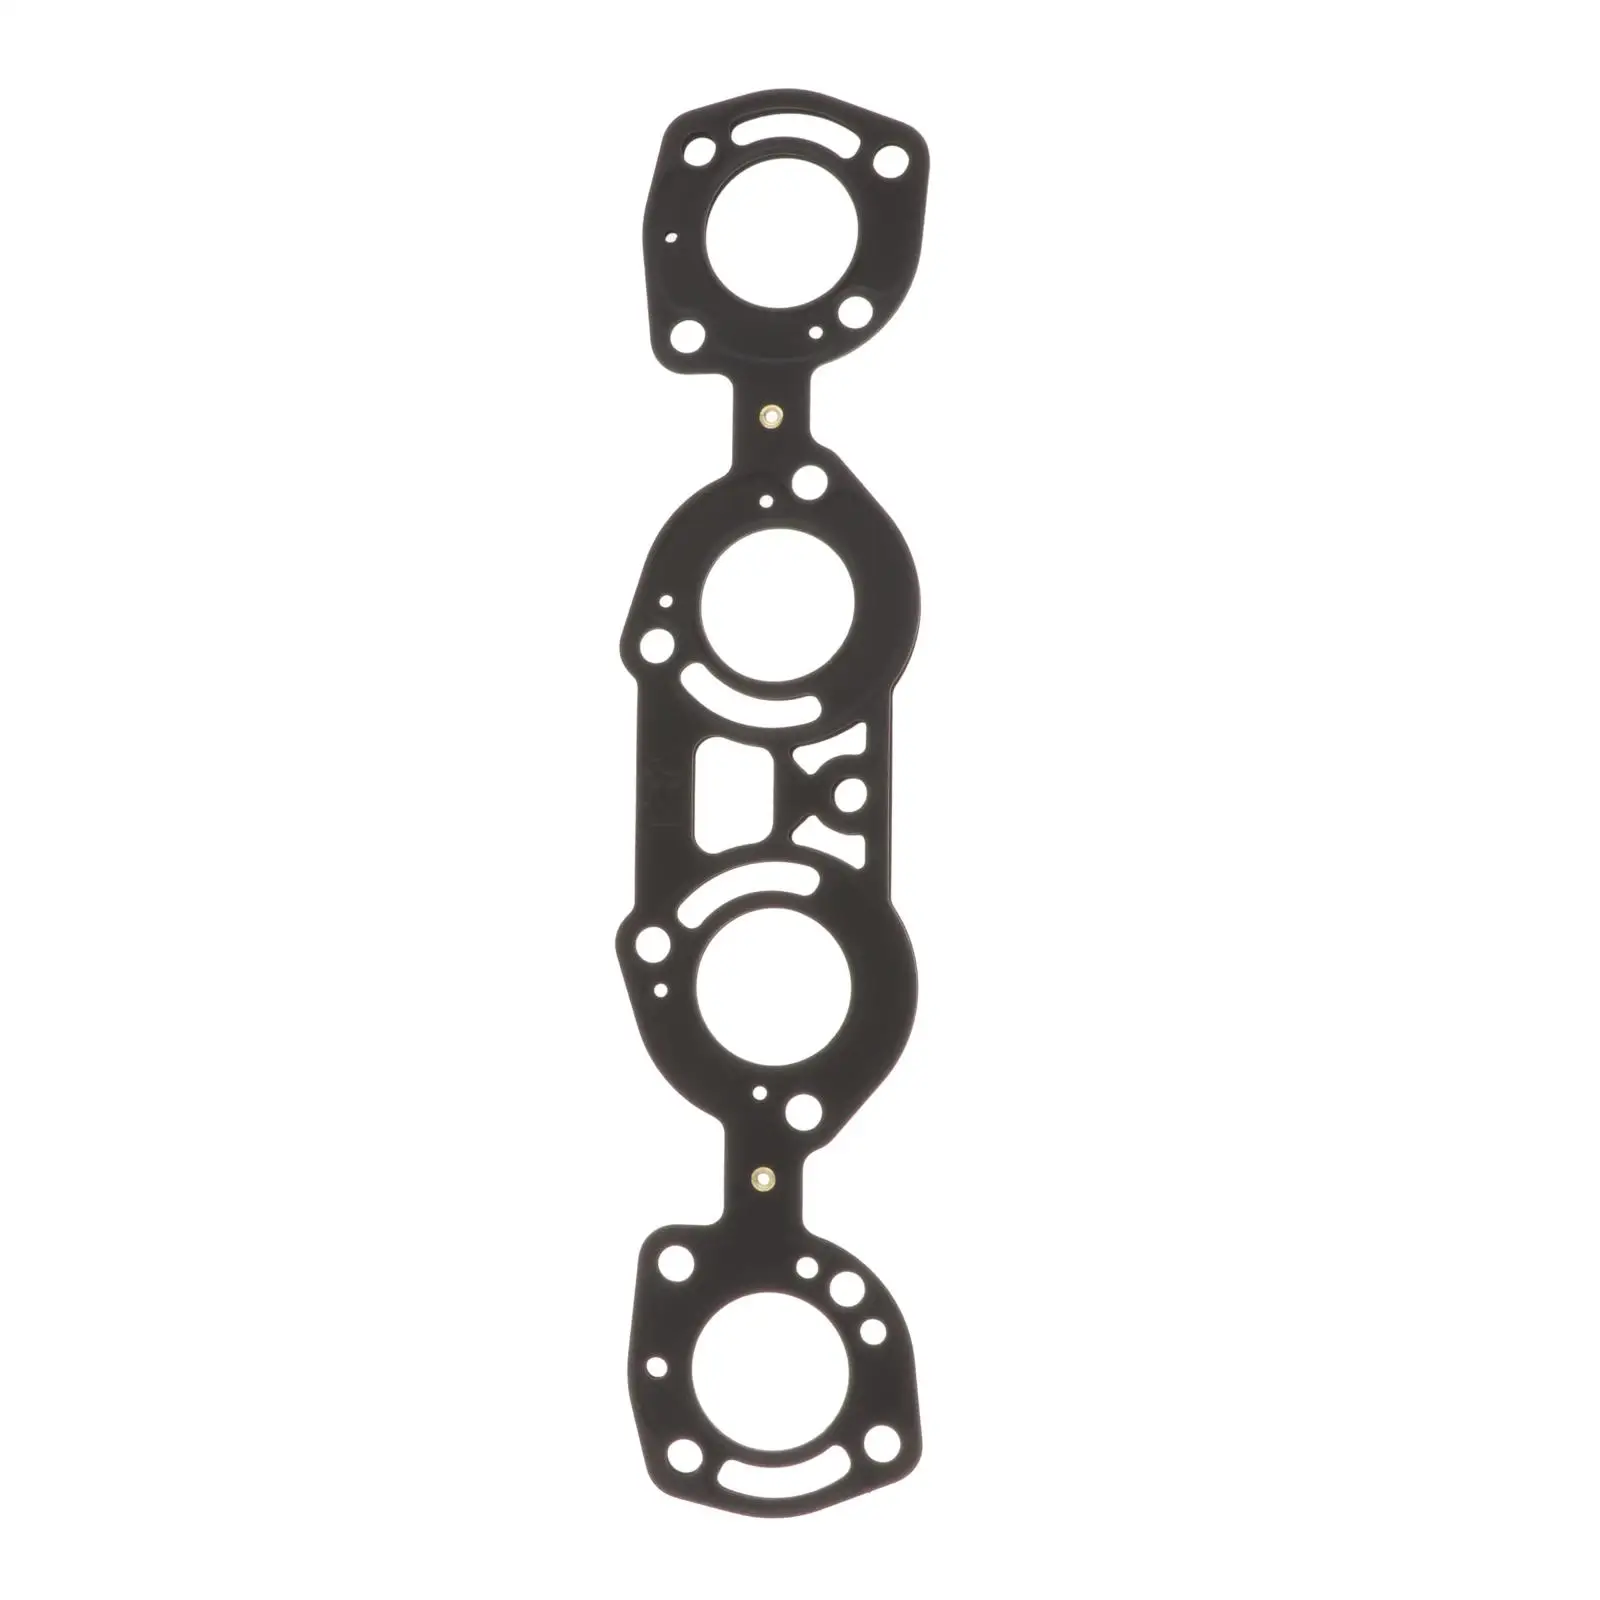 Exhaust Manifold Gasket Fit for Yamaha GP1800 6ET-14613-00-00 Replacement Parts Accessories